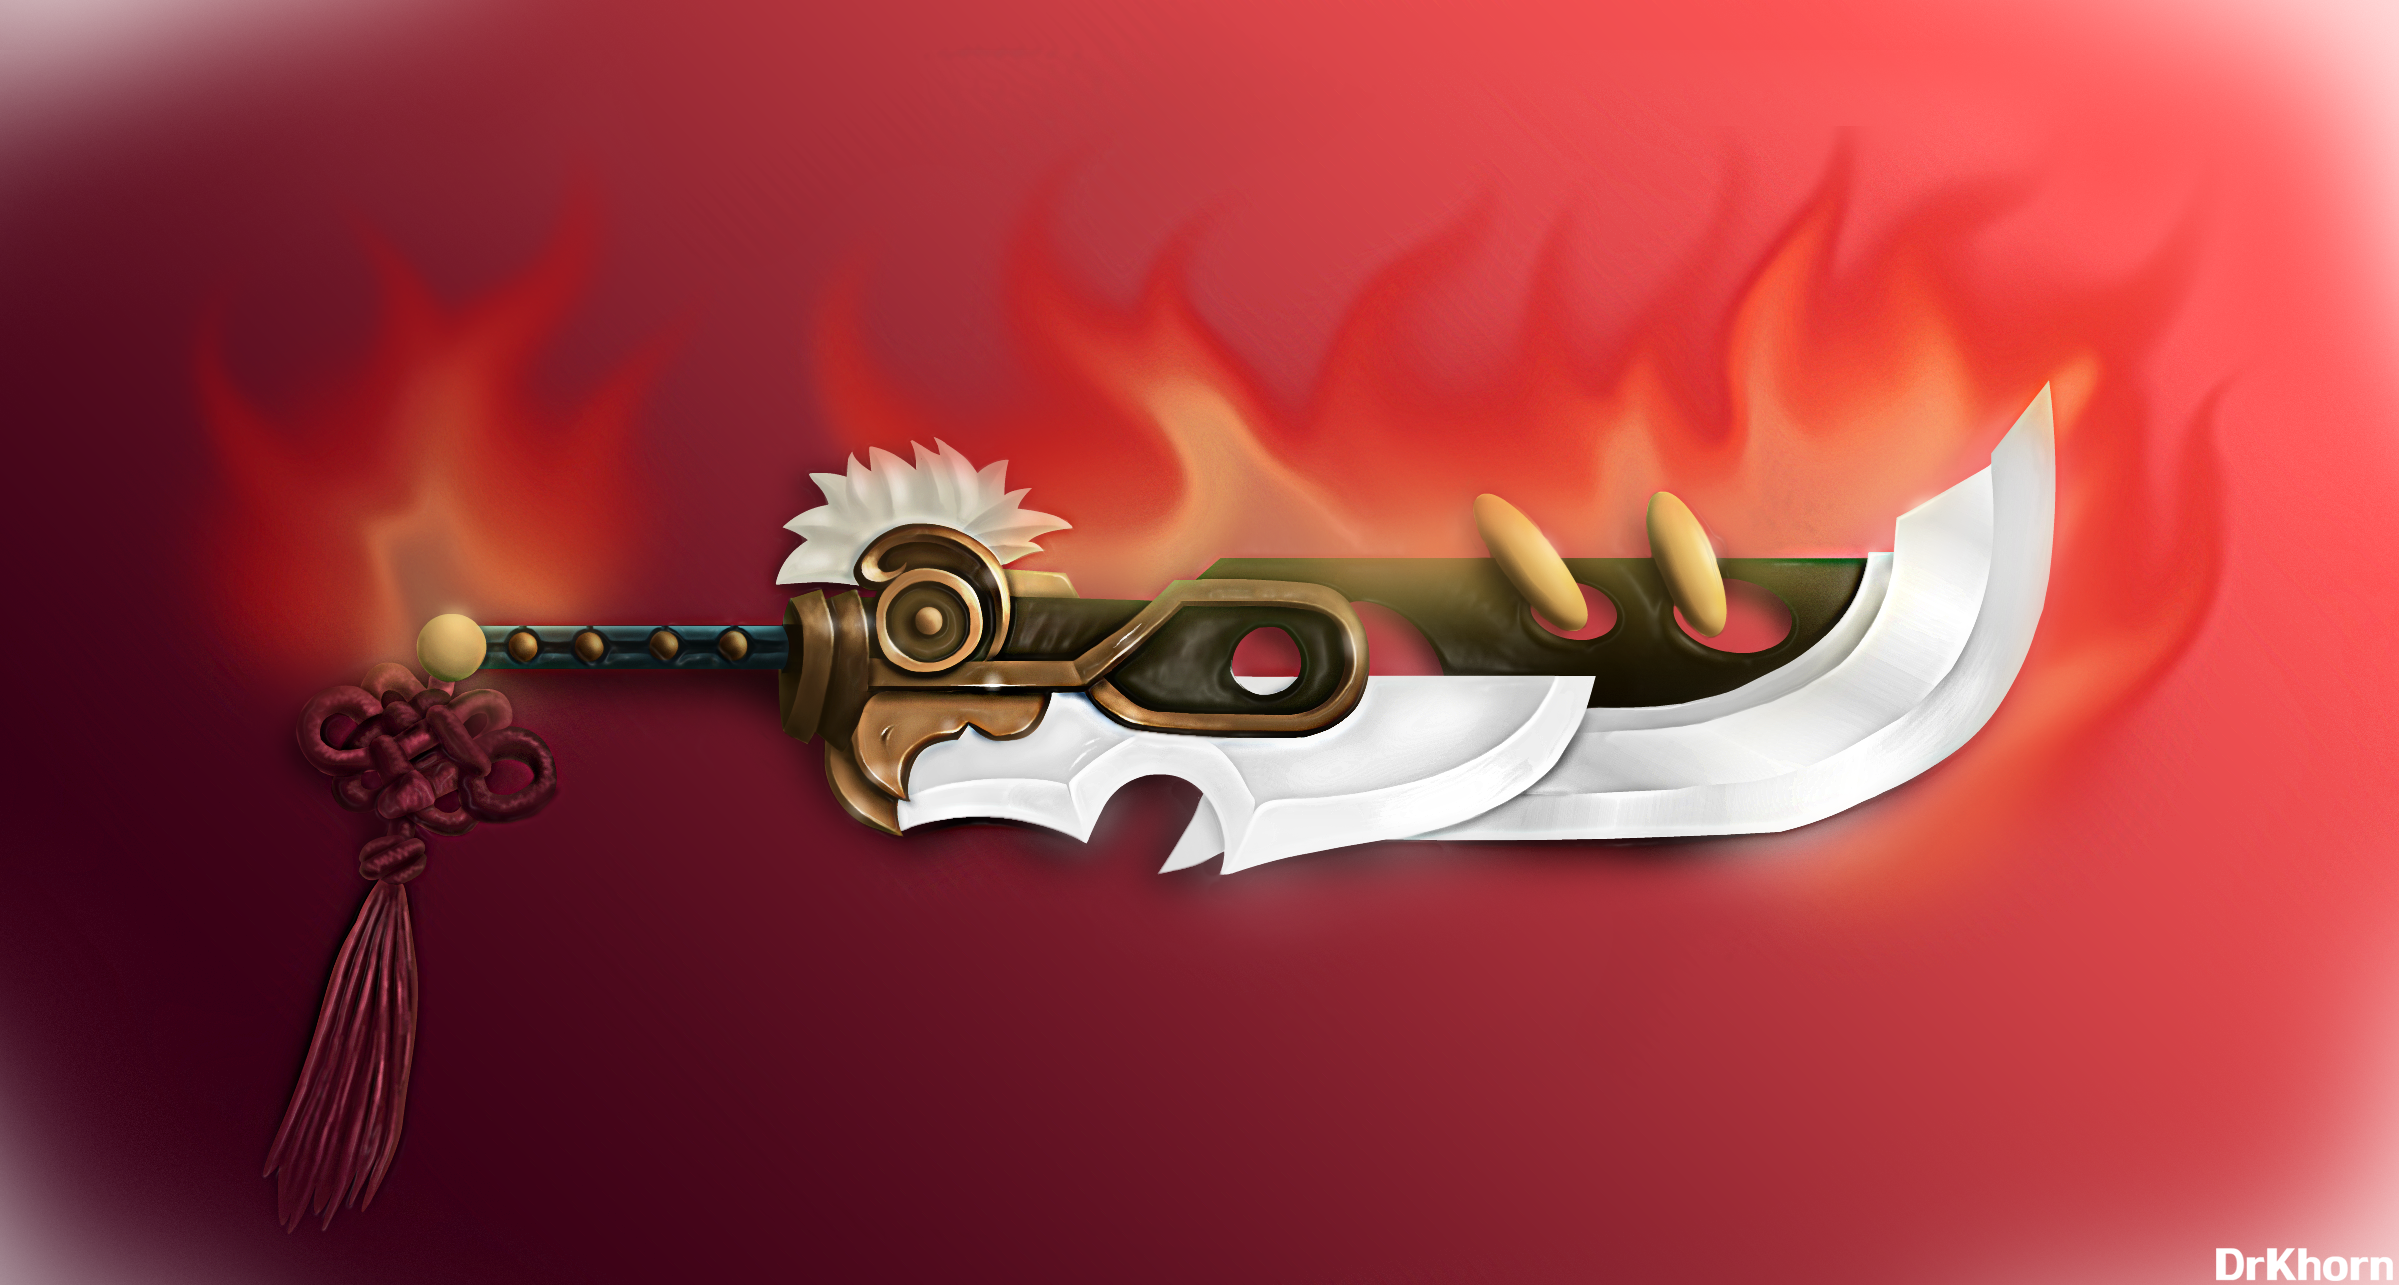 Dragons blade by drkhorn on